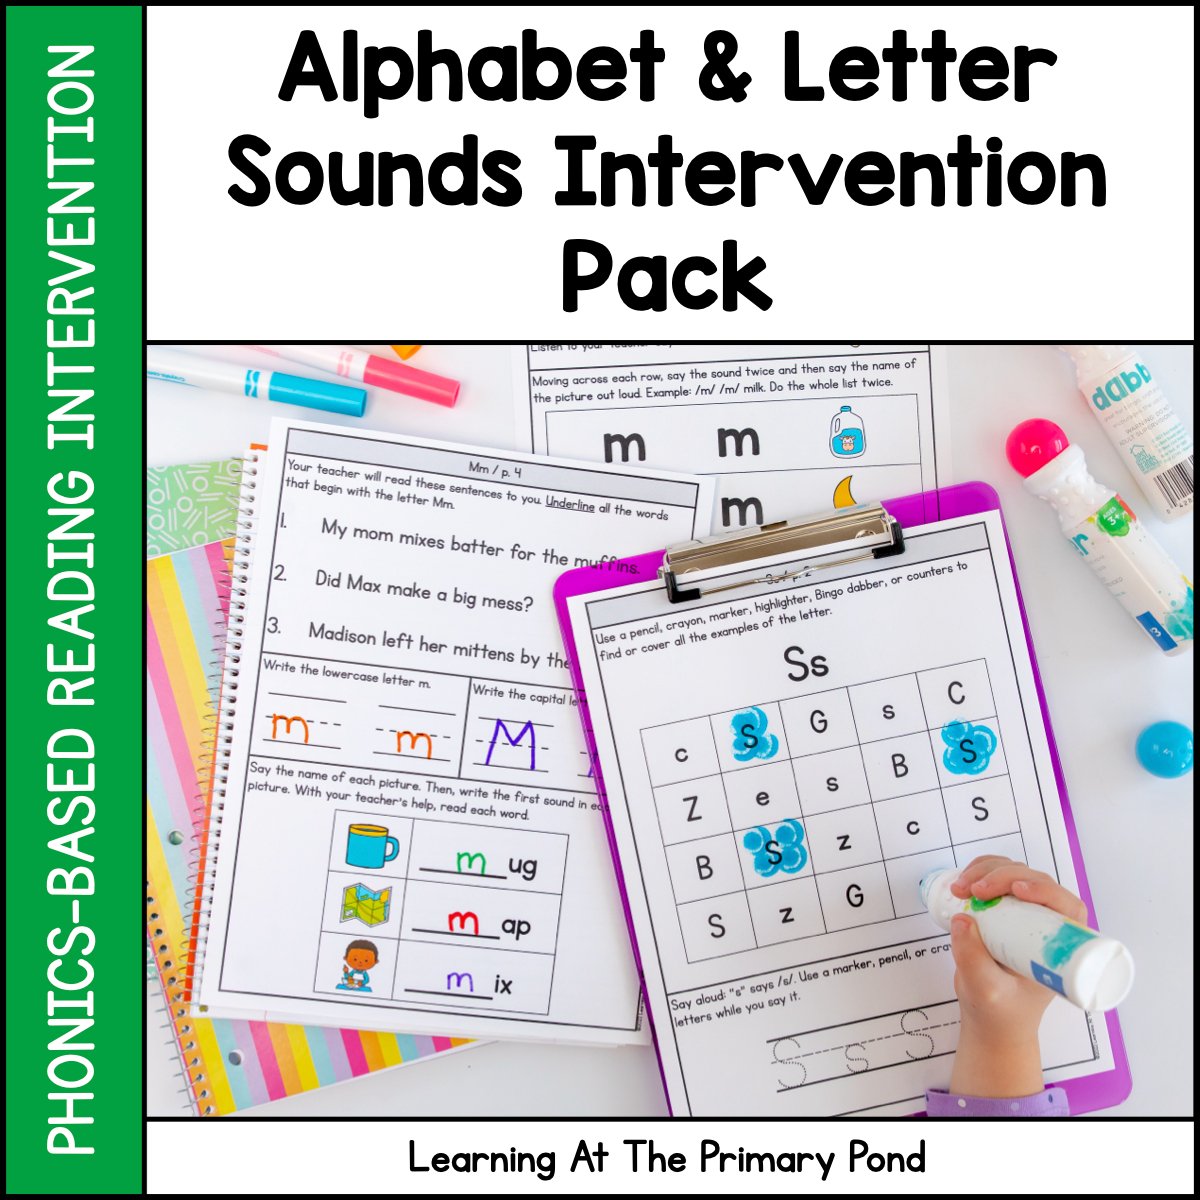 Letters and Sounds Intervention Pack | No-Prep, Phonics-Based Reading Intervention - learning-at-the-primary-pond